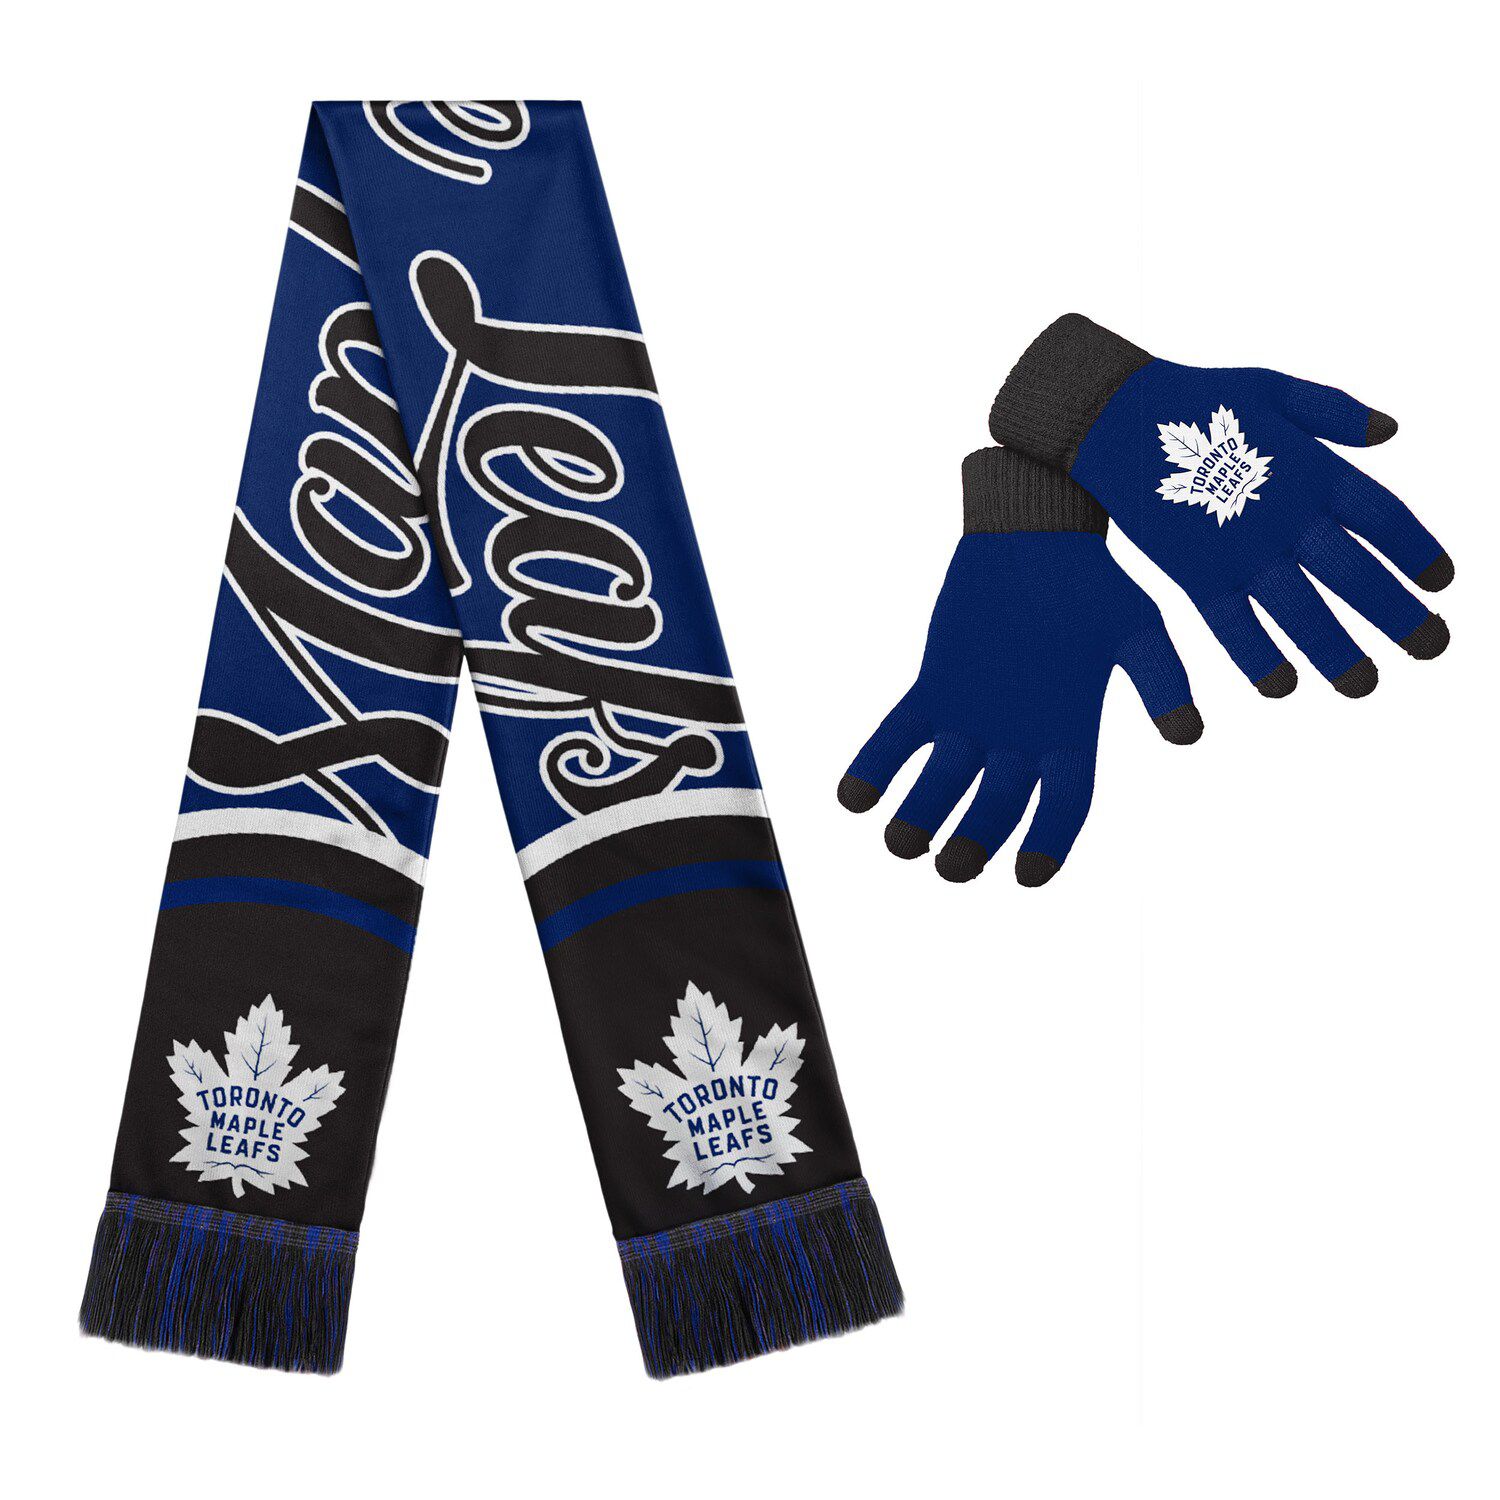 Image for Unbranded Women's Toronto Maple Leafs Glove and Scarf Set at Kohl's.